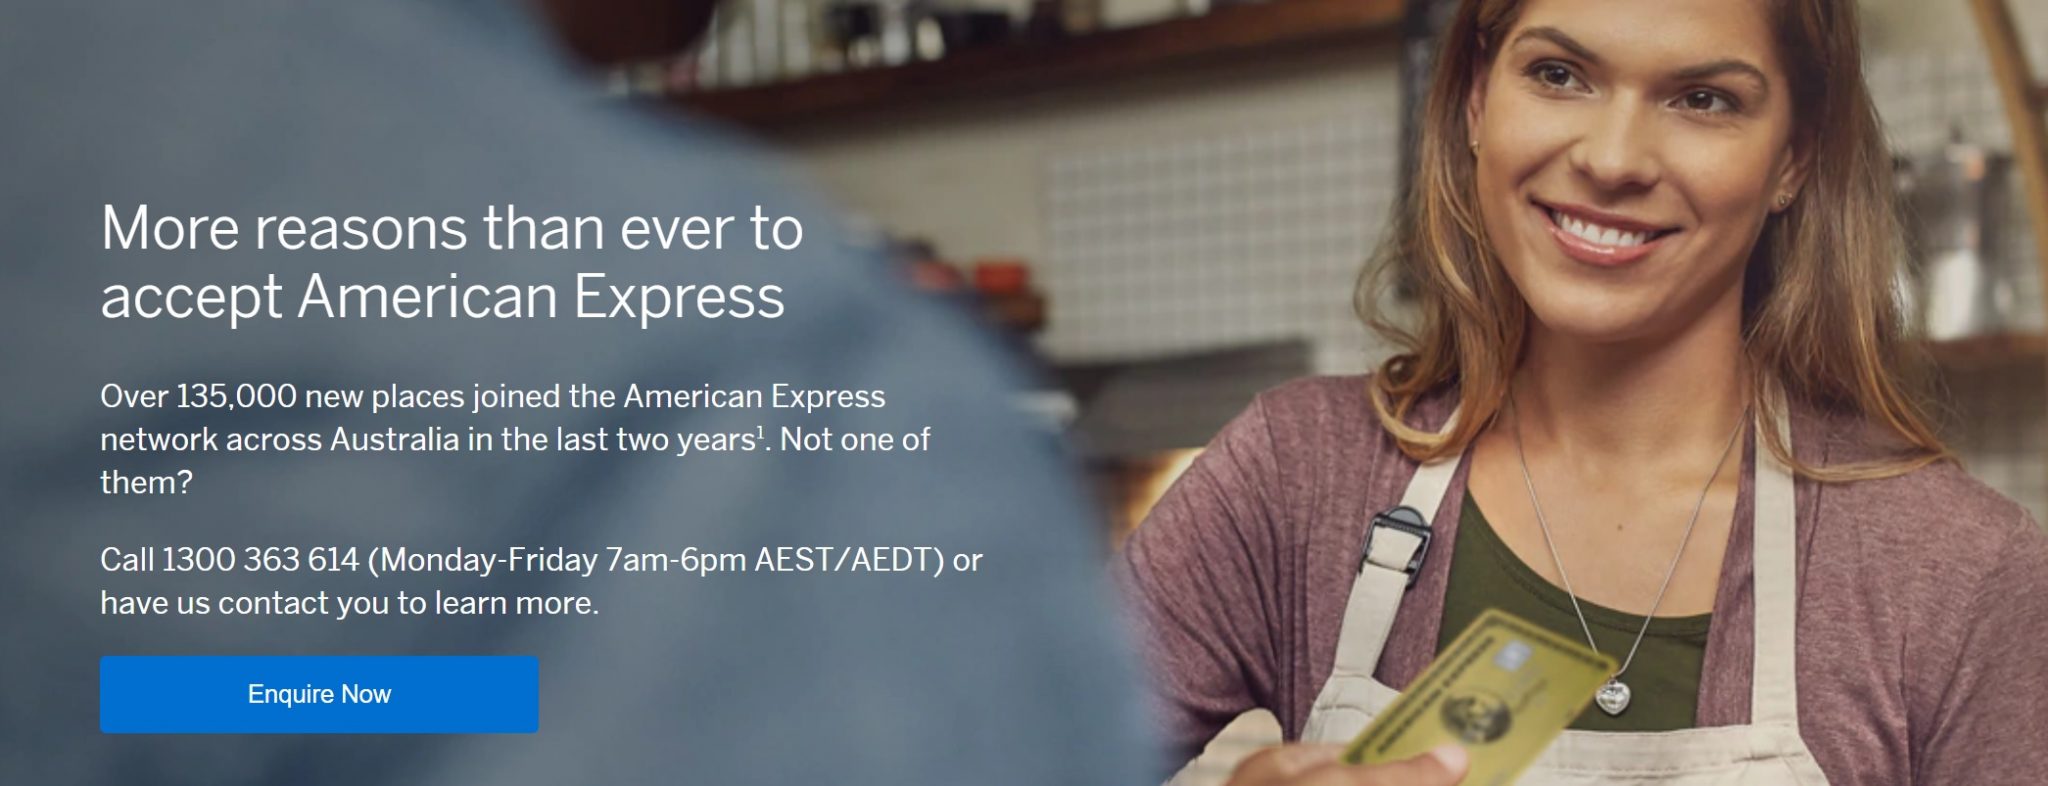 More reasons than ever to accept American Express